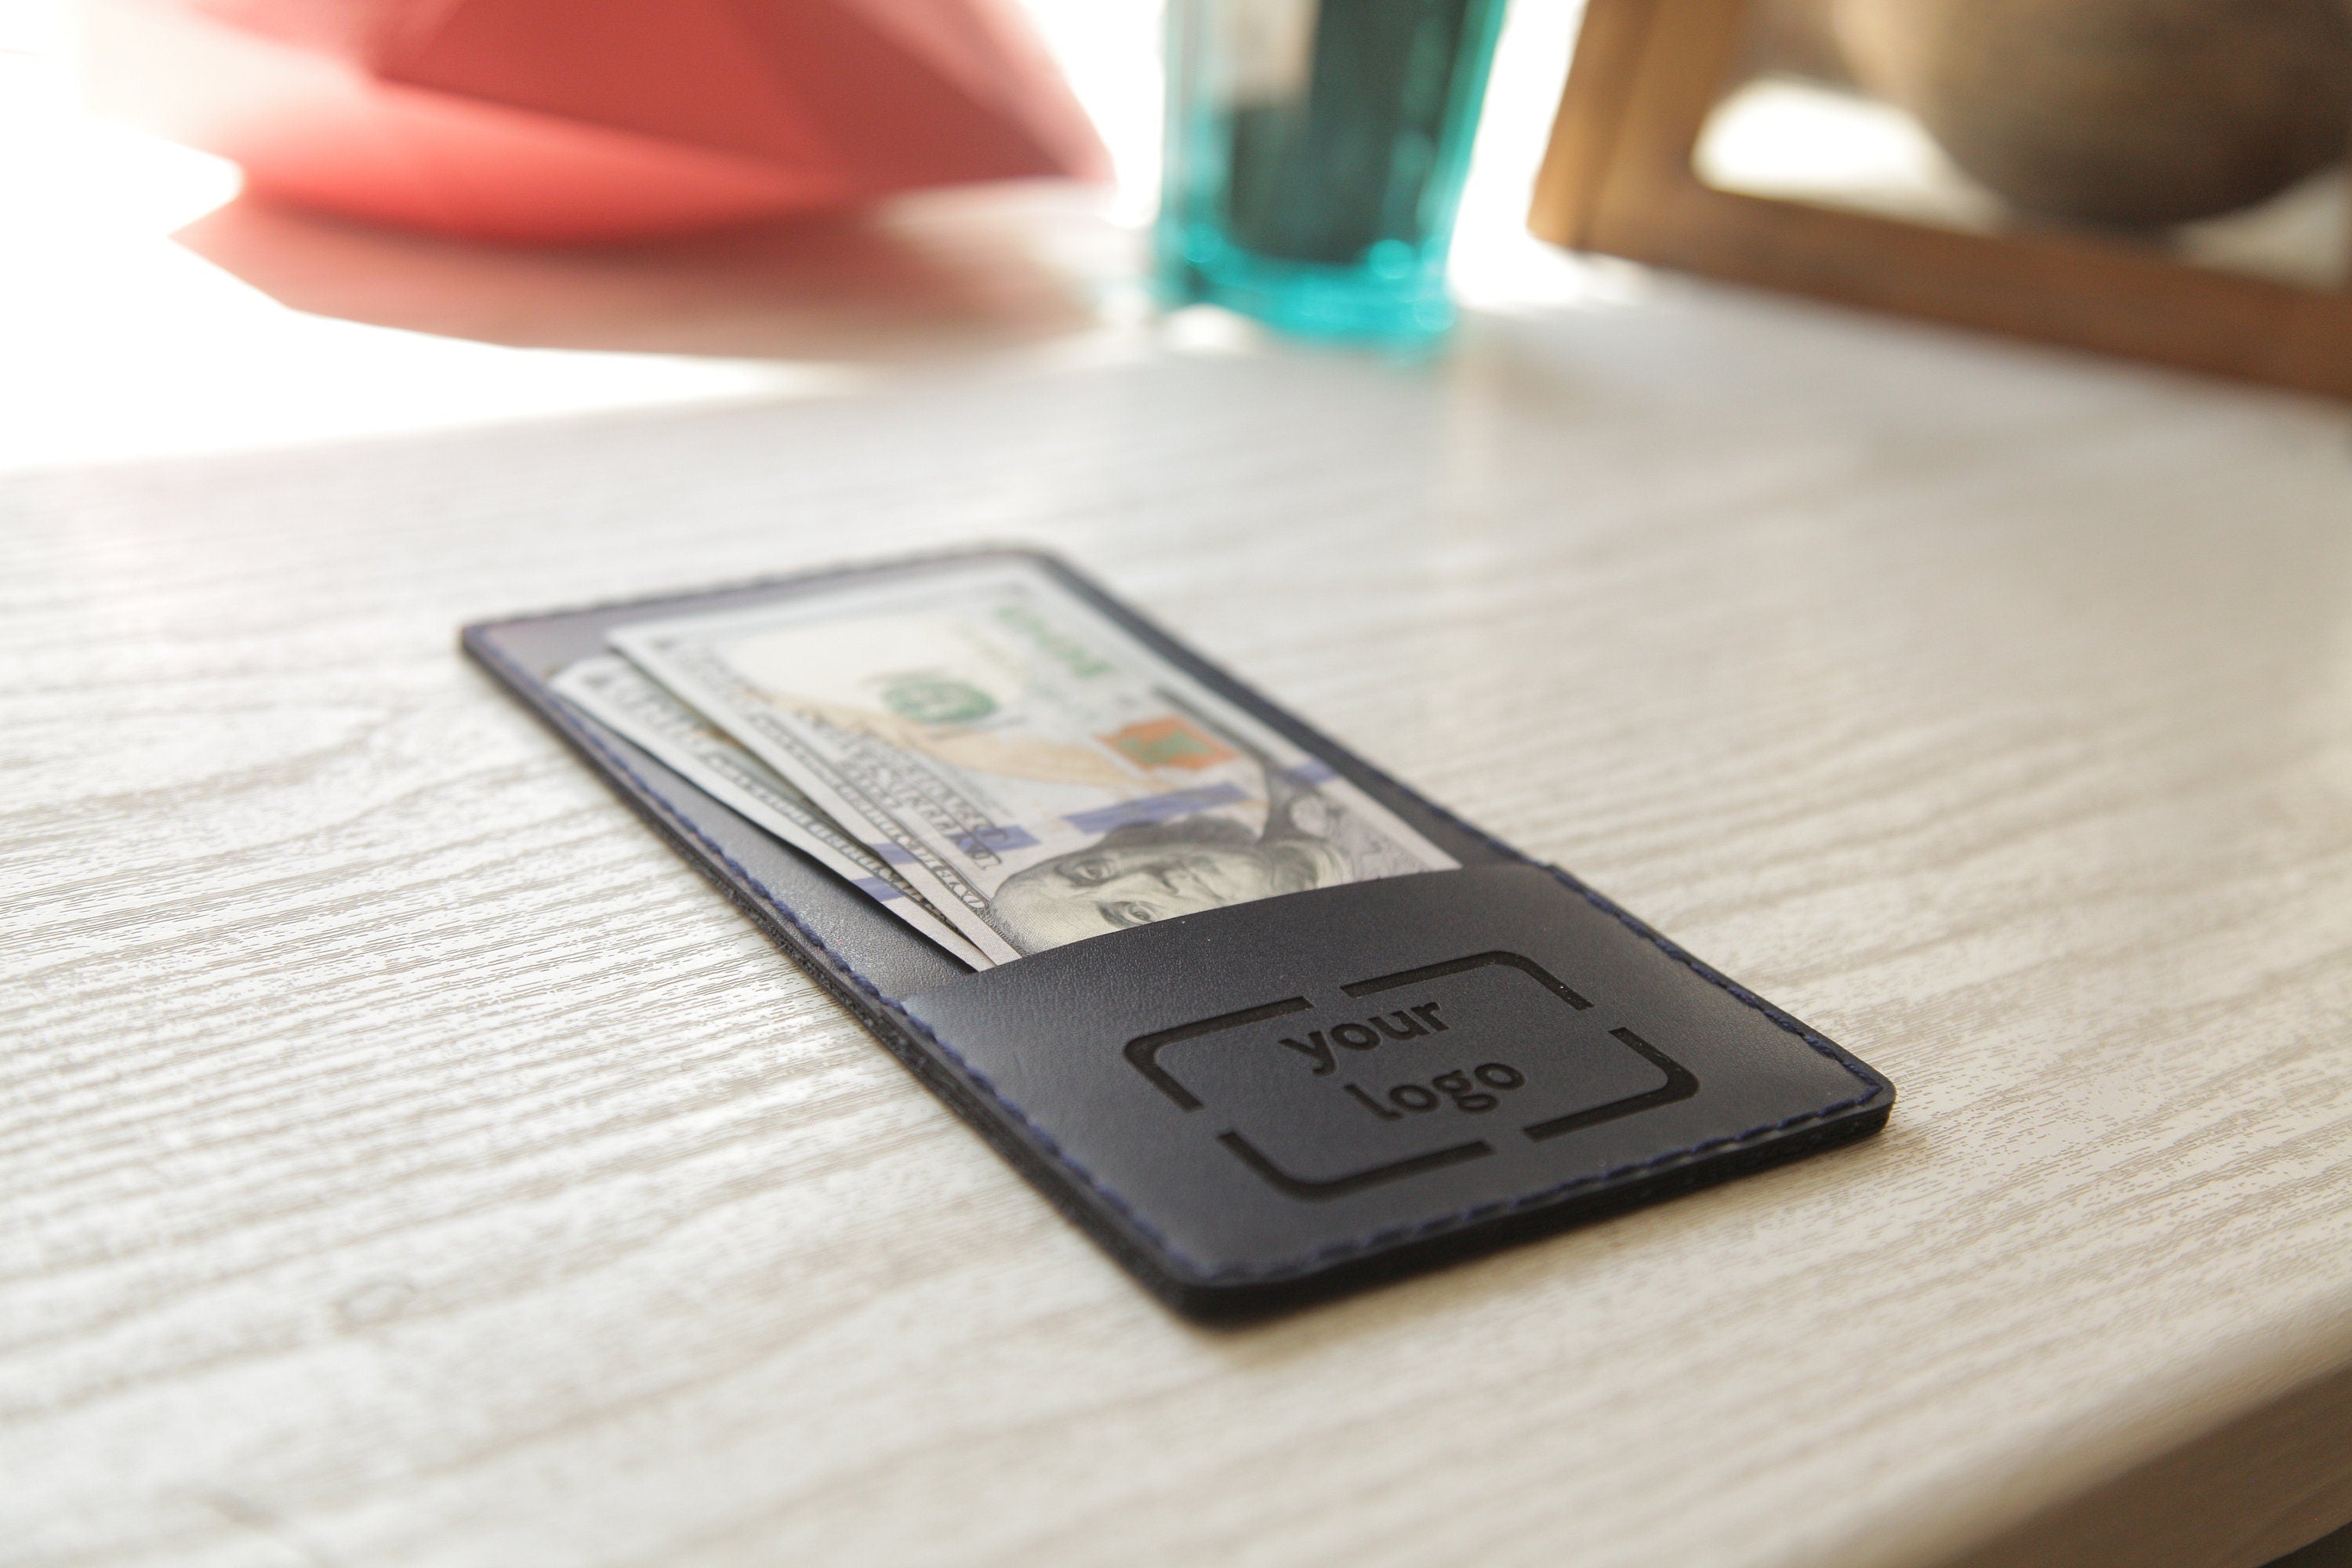 Eco-leather check presenter for a restaurant and its features